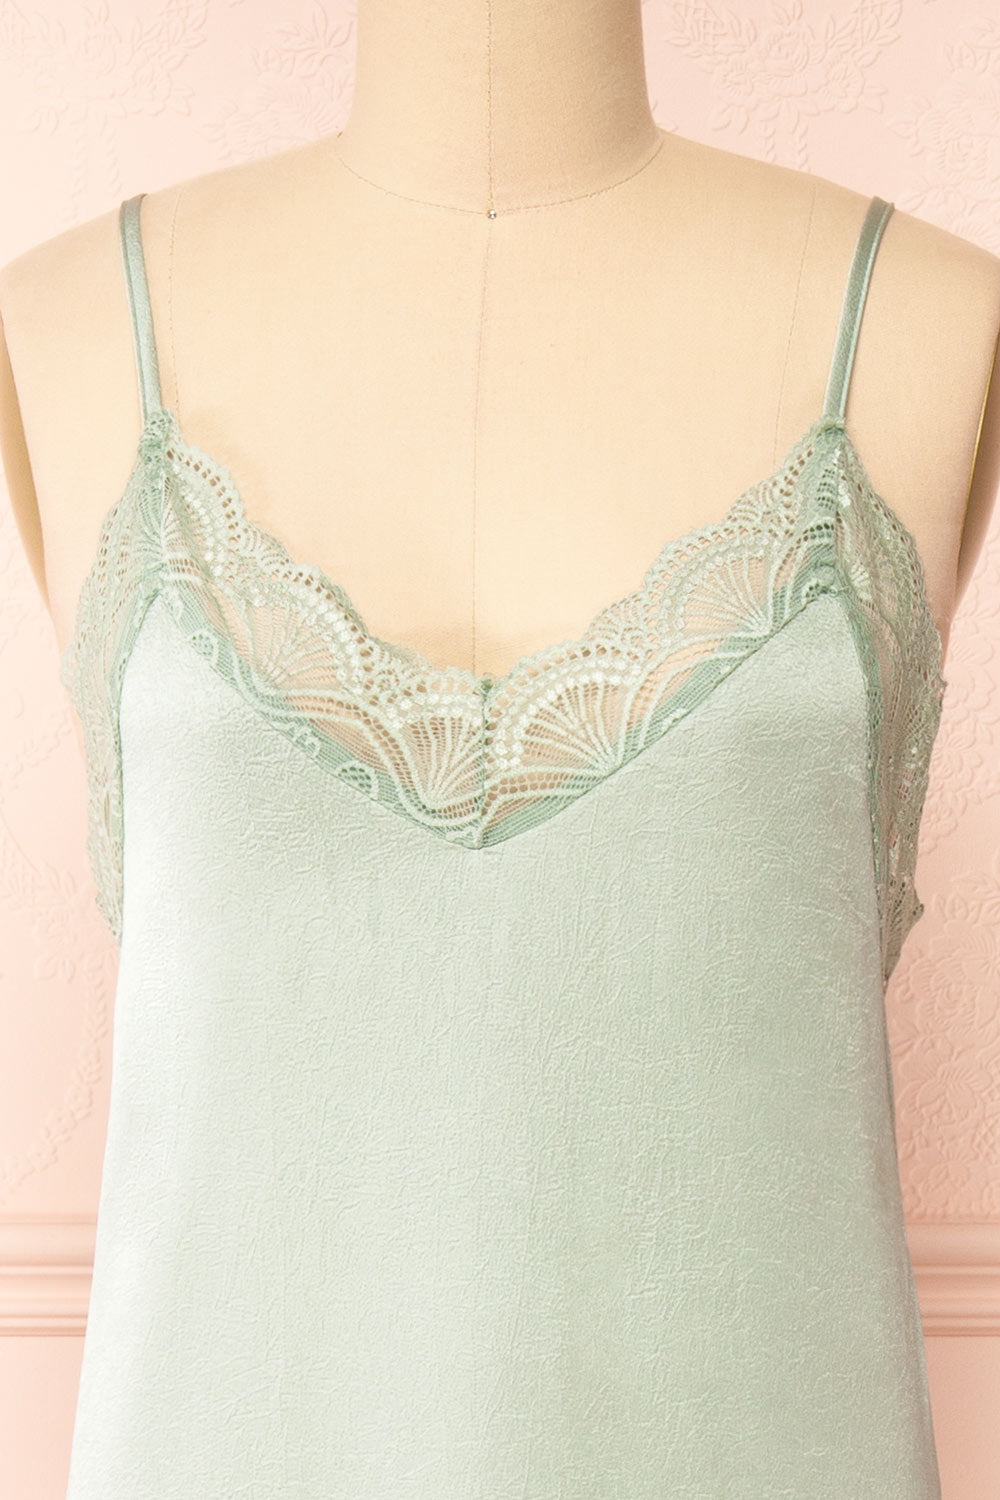 Lilly Pulitzer Nadia Satin Cami in Evergreen - Sizes 4-12